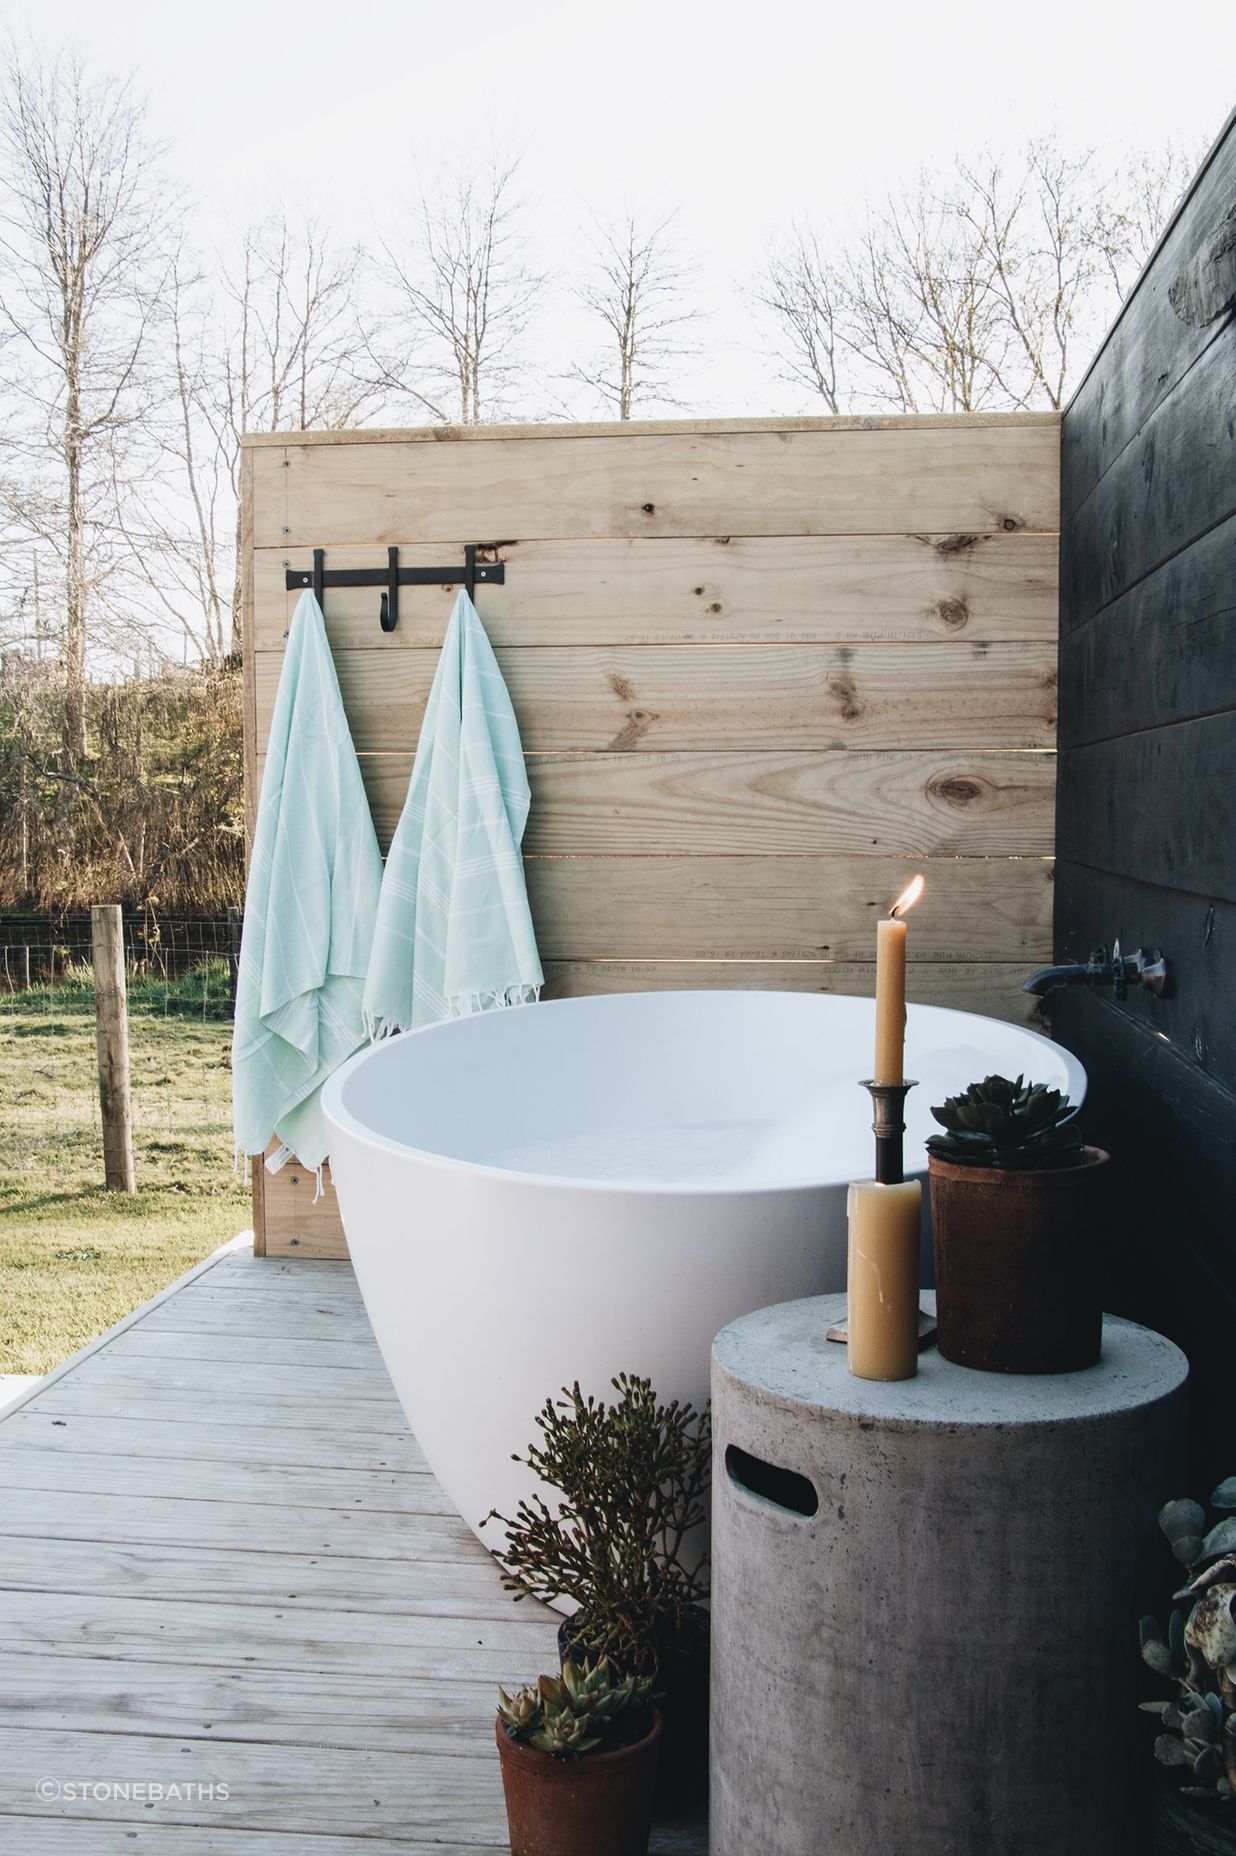 Outdoor baths are becoming popular in new builds.